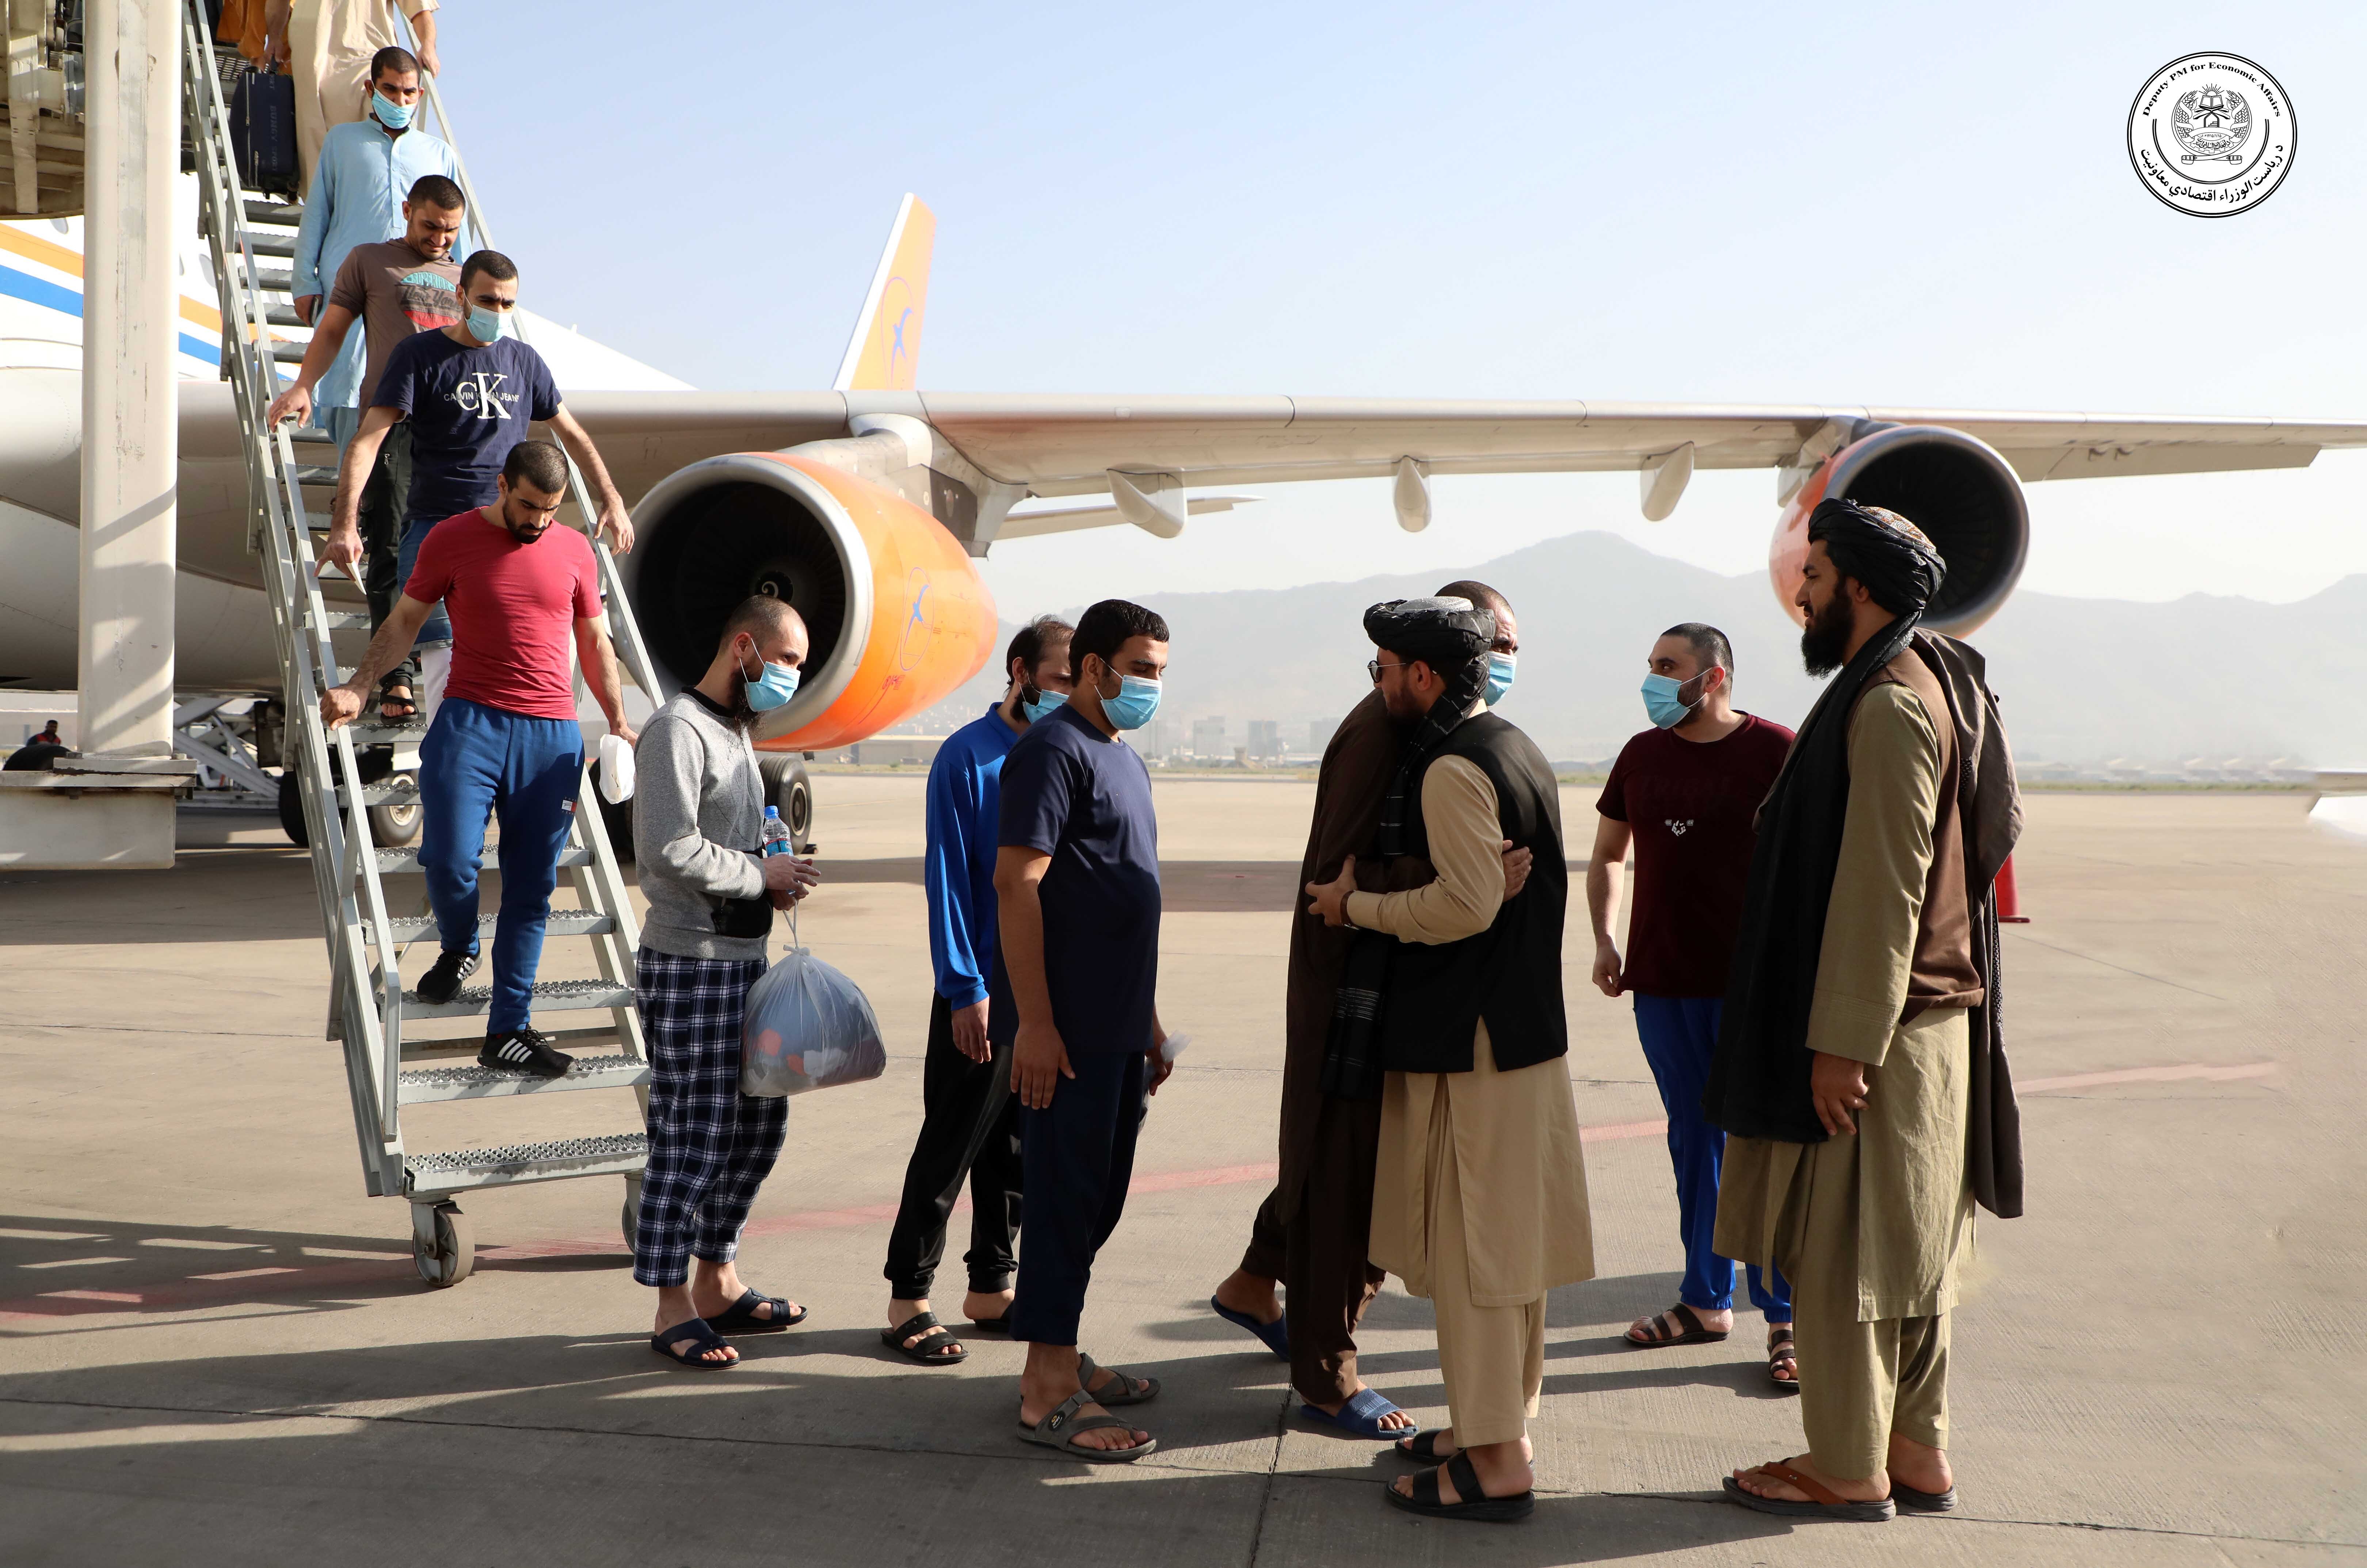 12 Afghans were released from the UAE prison and returned to their country today